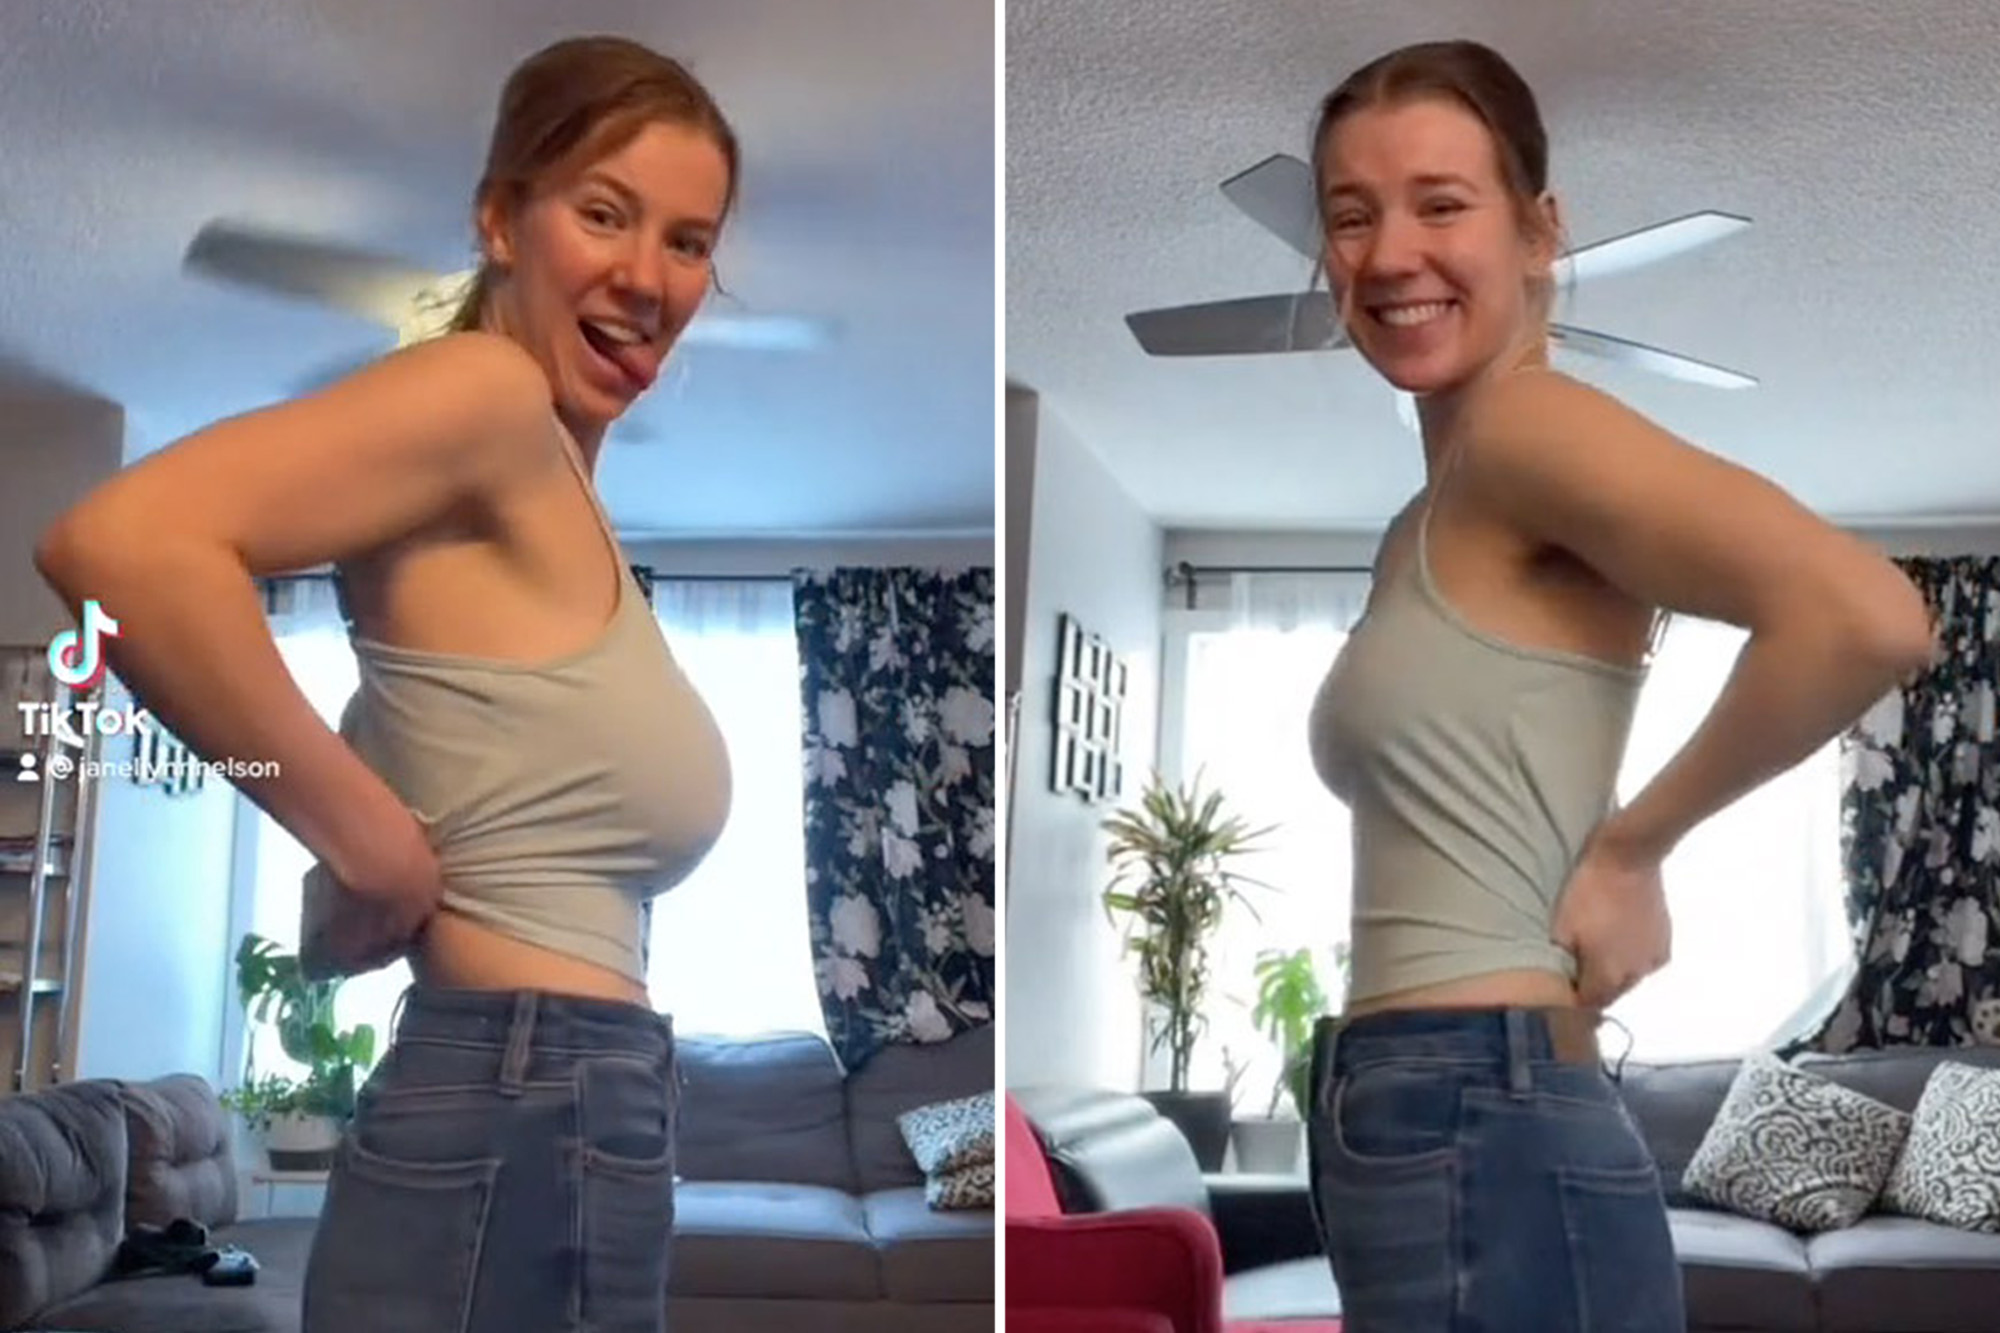 anita sharlow recommends Skinny Women With Big Natural Tits